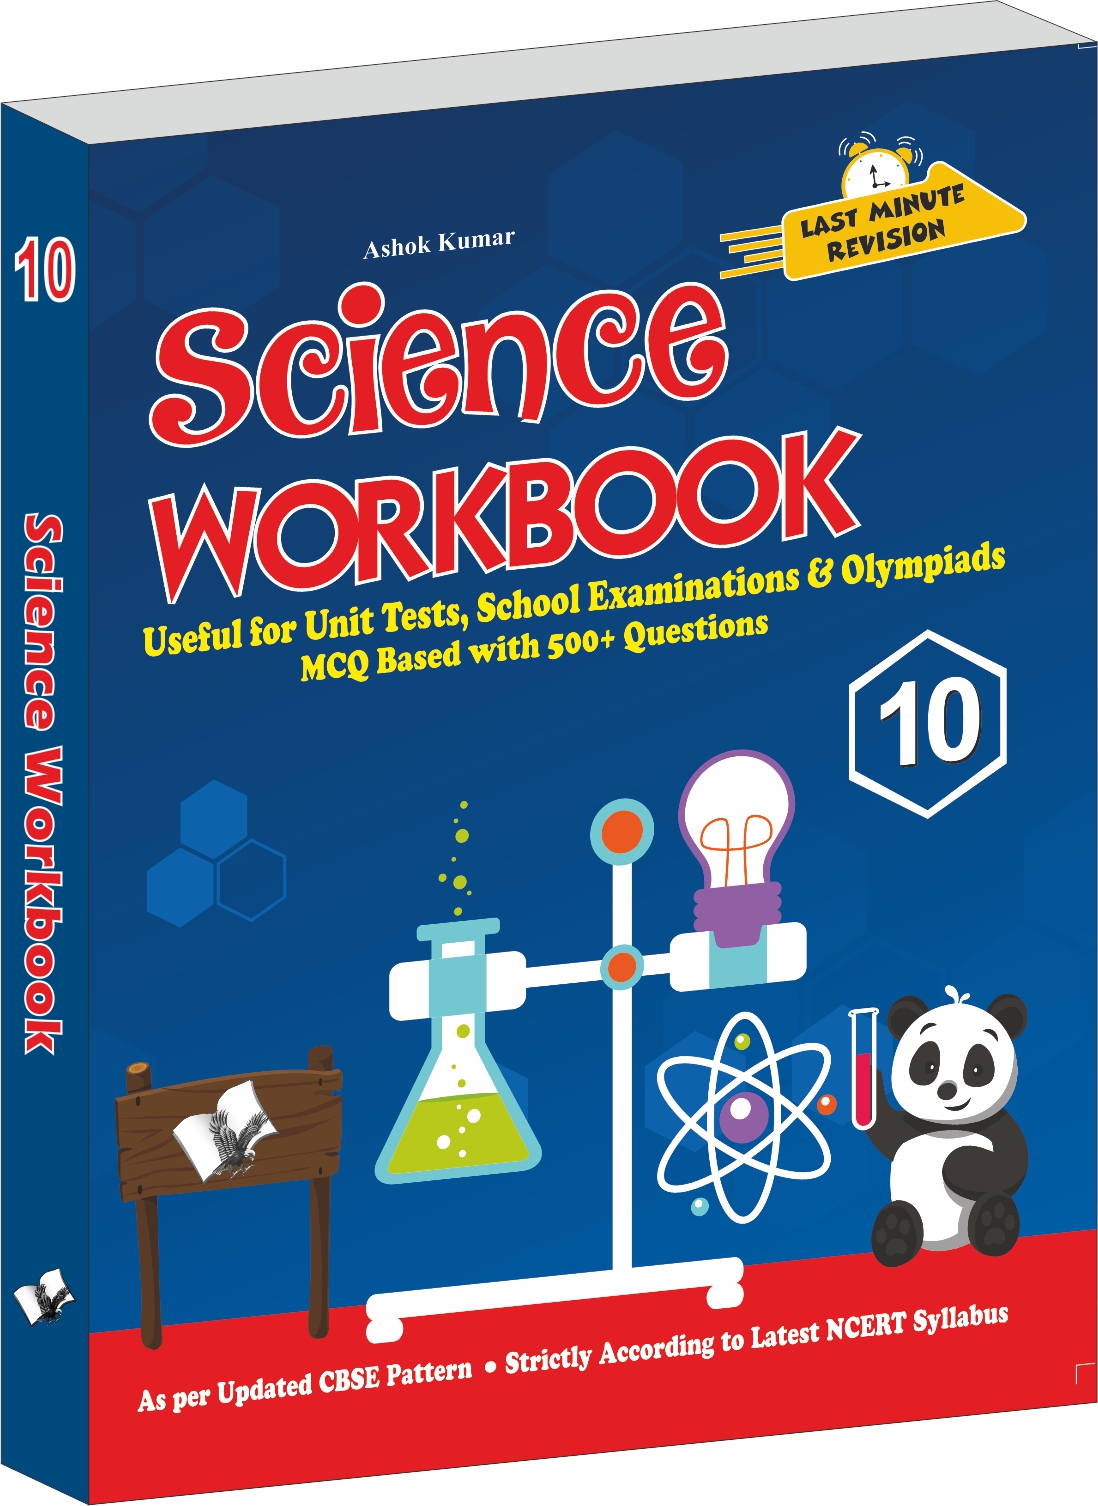 Science Workbook Class 10-Useful for Unit Tests, School Examinations & Olympiads